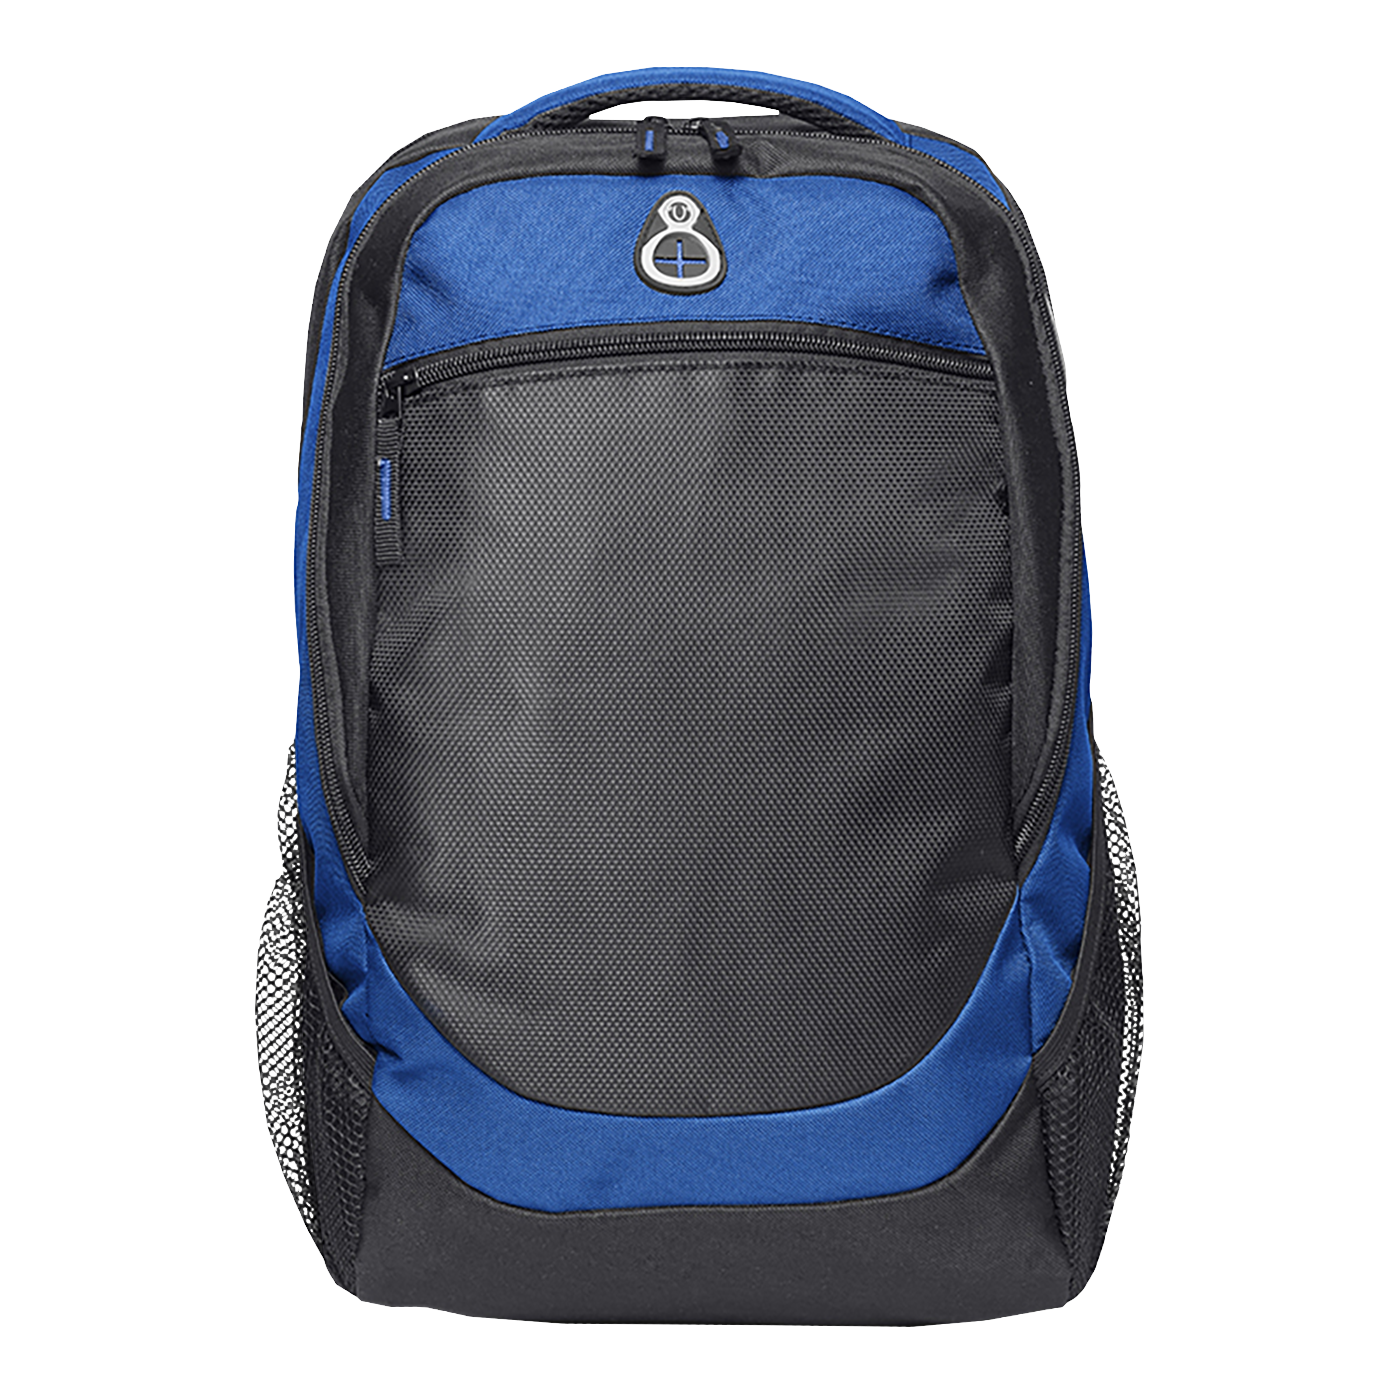 Hashtag Backpack with Back Access Laptop Compartment - Blue Reflex